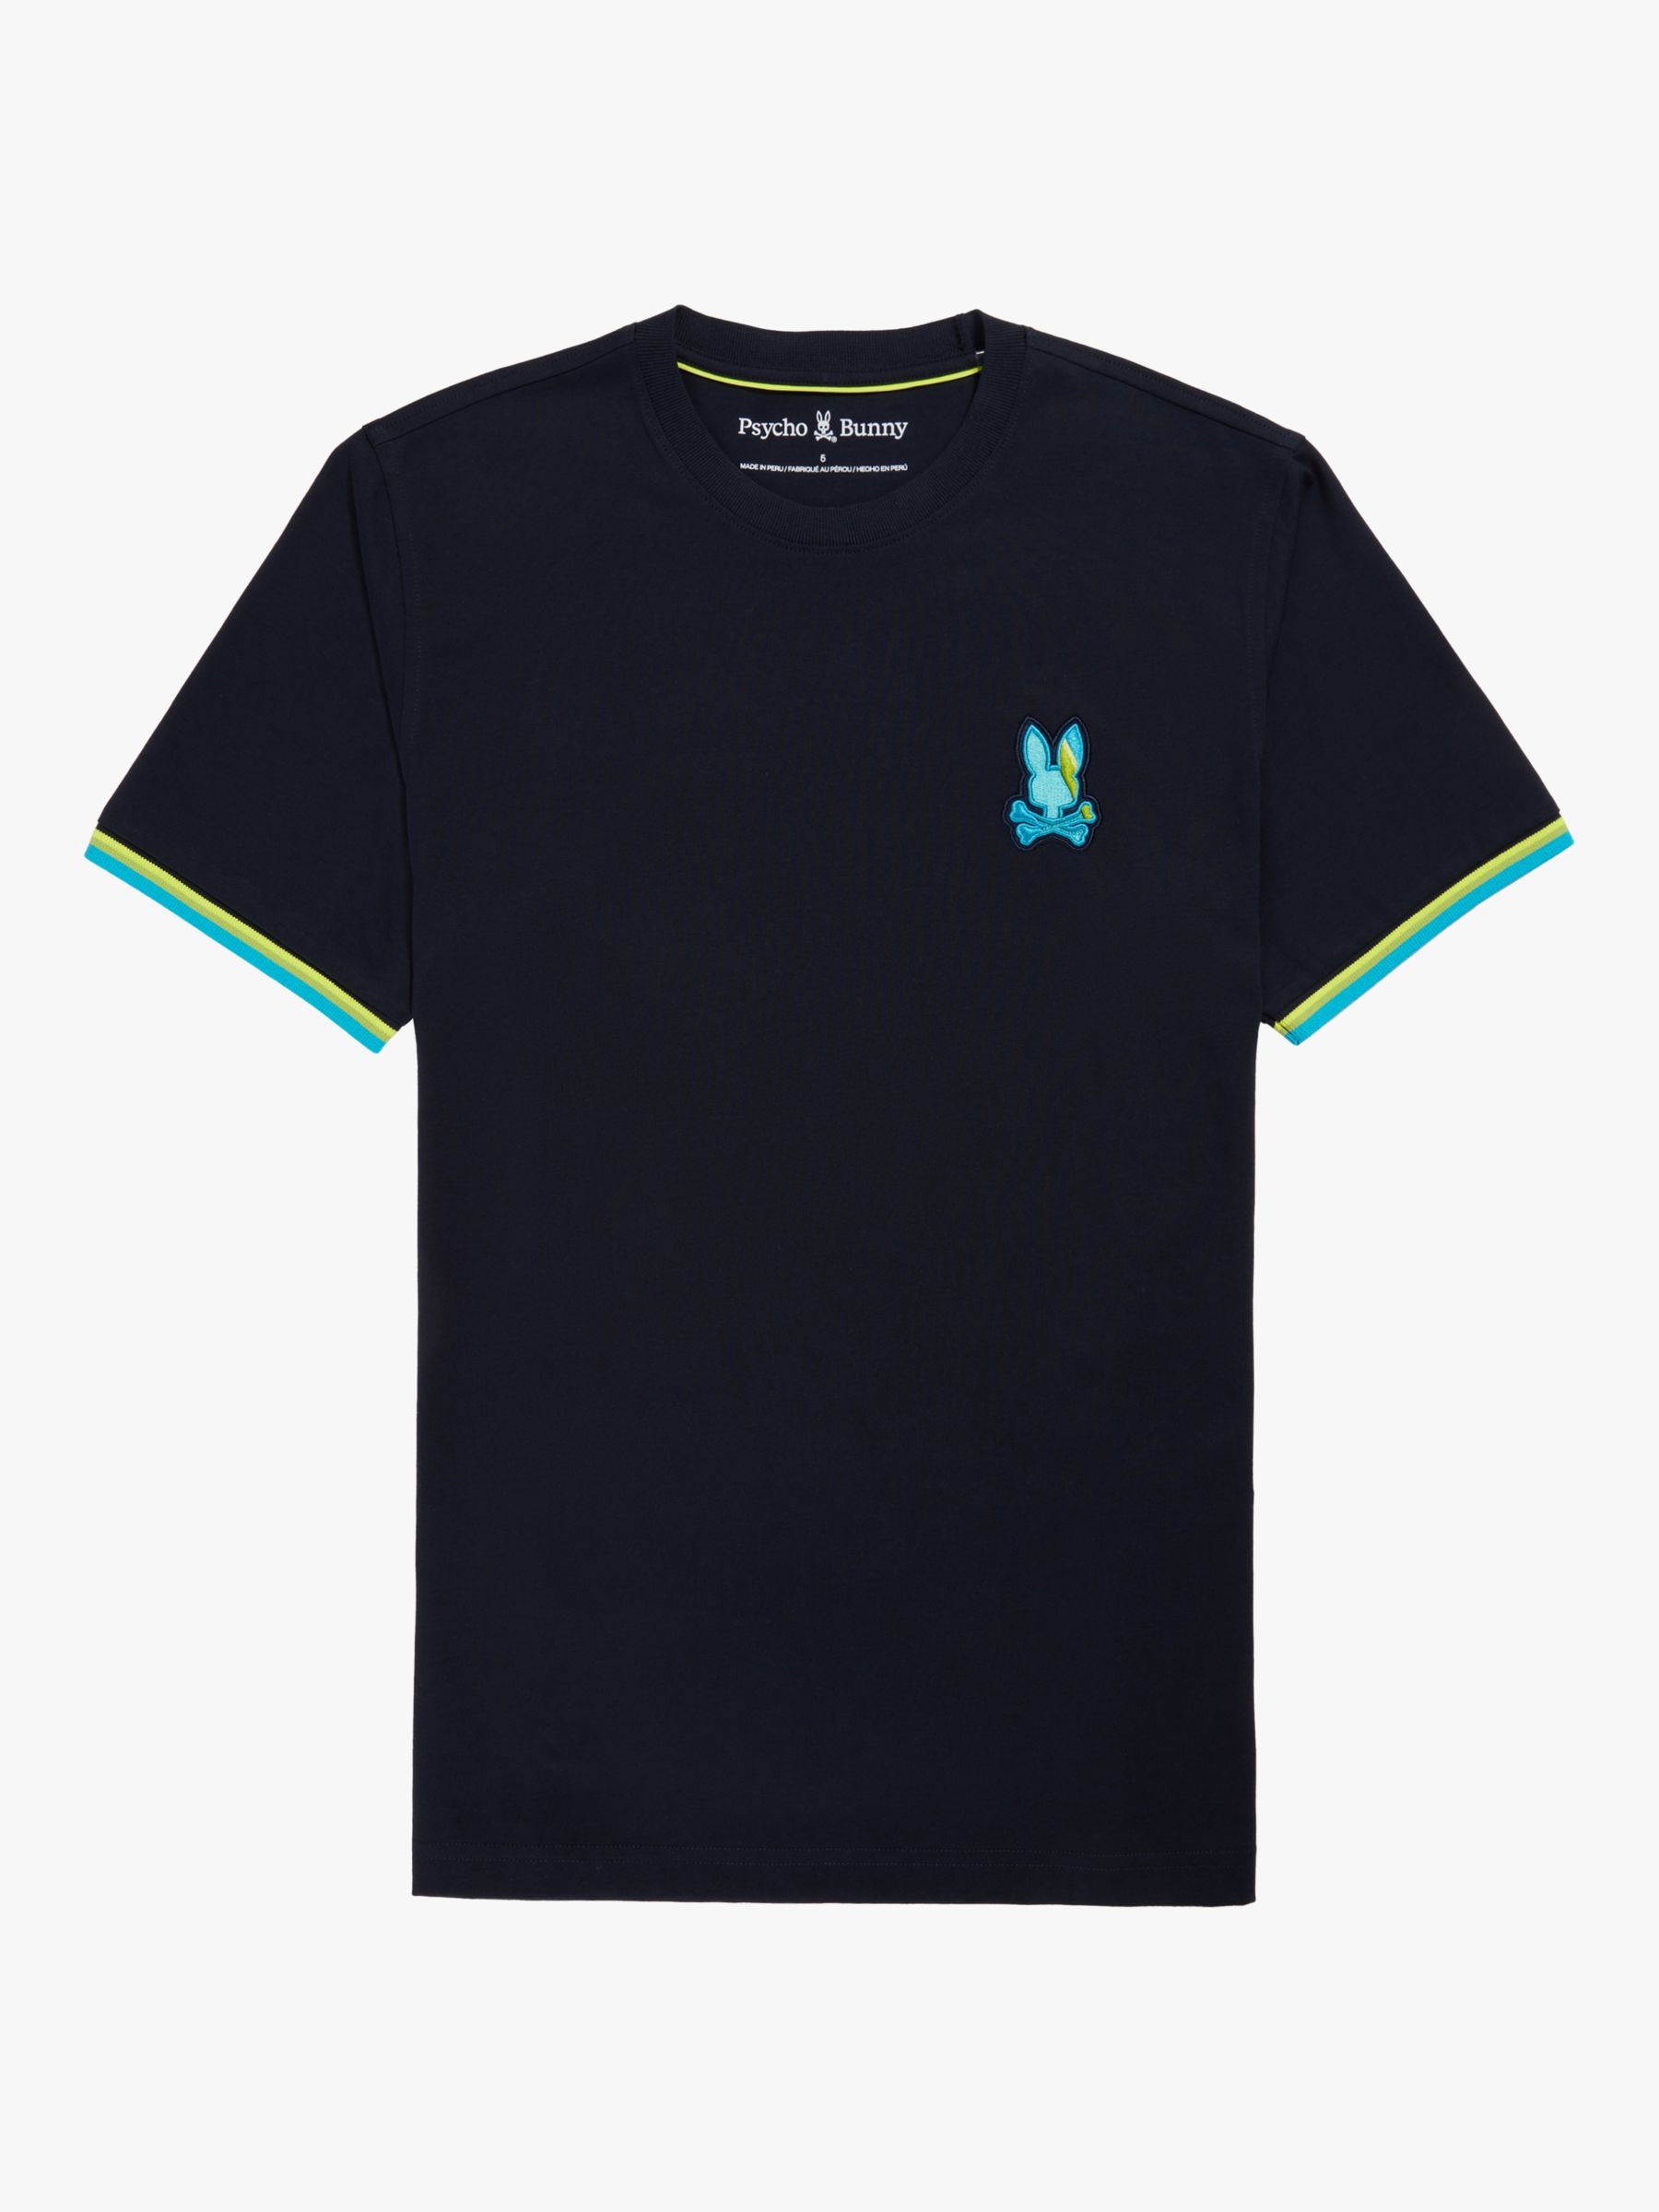 Buy Psycho Bunny Apple Valley Fashion T-Shirt, Navy/Multi Online at johnlewis.com